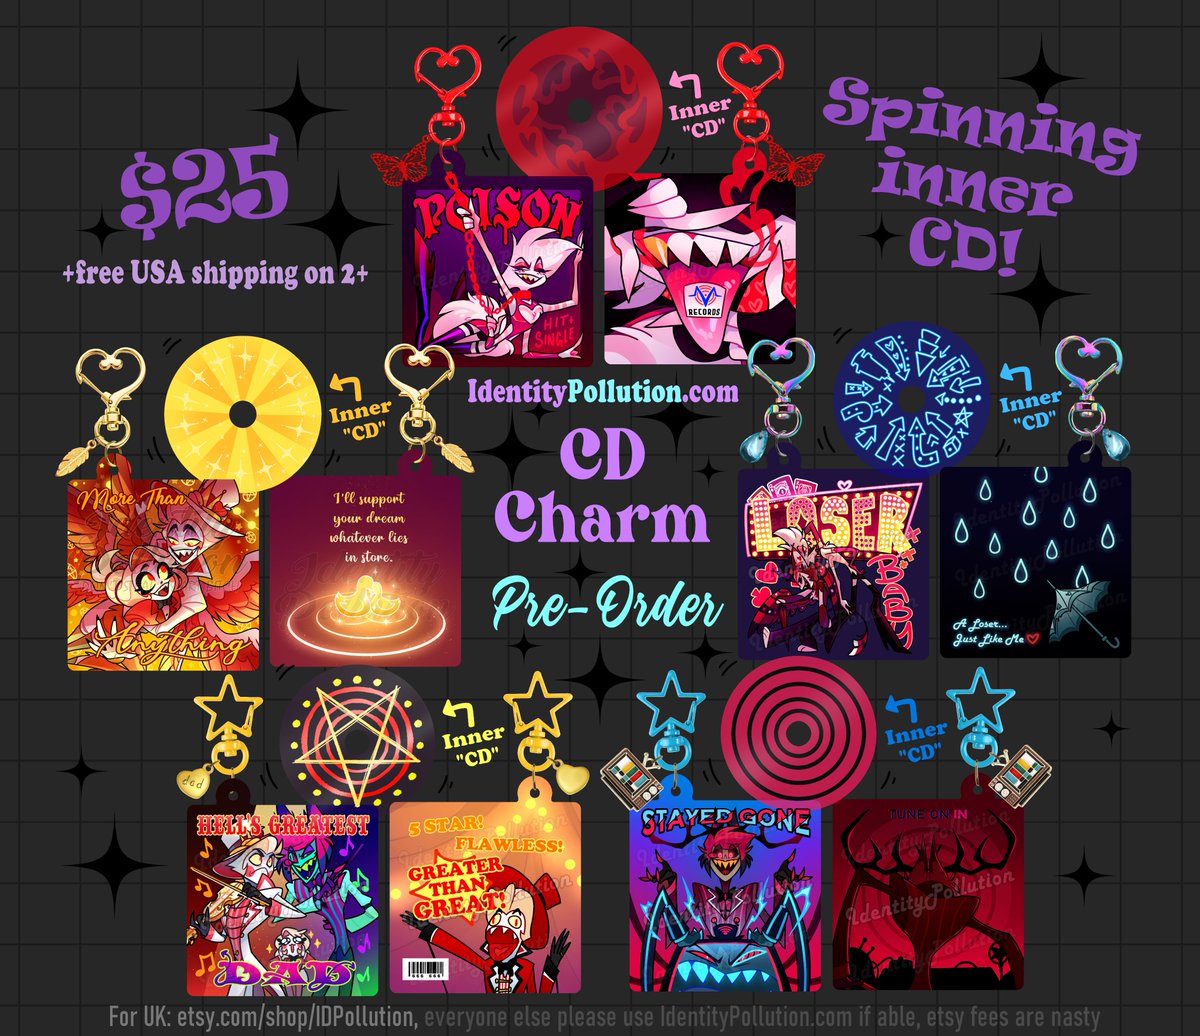 I see folks are eager for the Hazbin Hotel CD charms tomorrow but I'd like to give a little more notice so to meet the middle I'll release this Friday, April 12th at 6pm ET! There will be 50 available of each for the first run, $25/ea and USA shipping is on me if you order 2+!